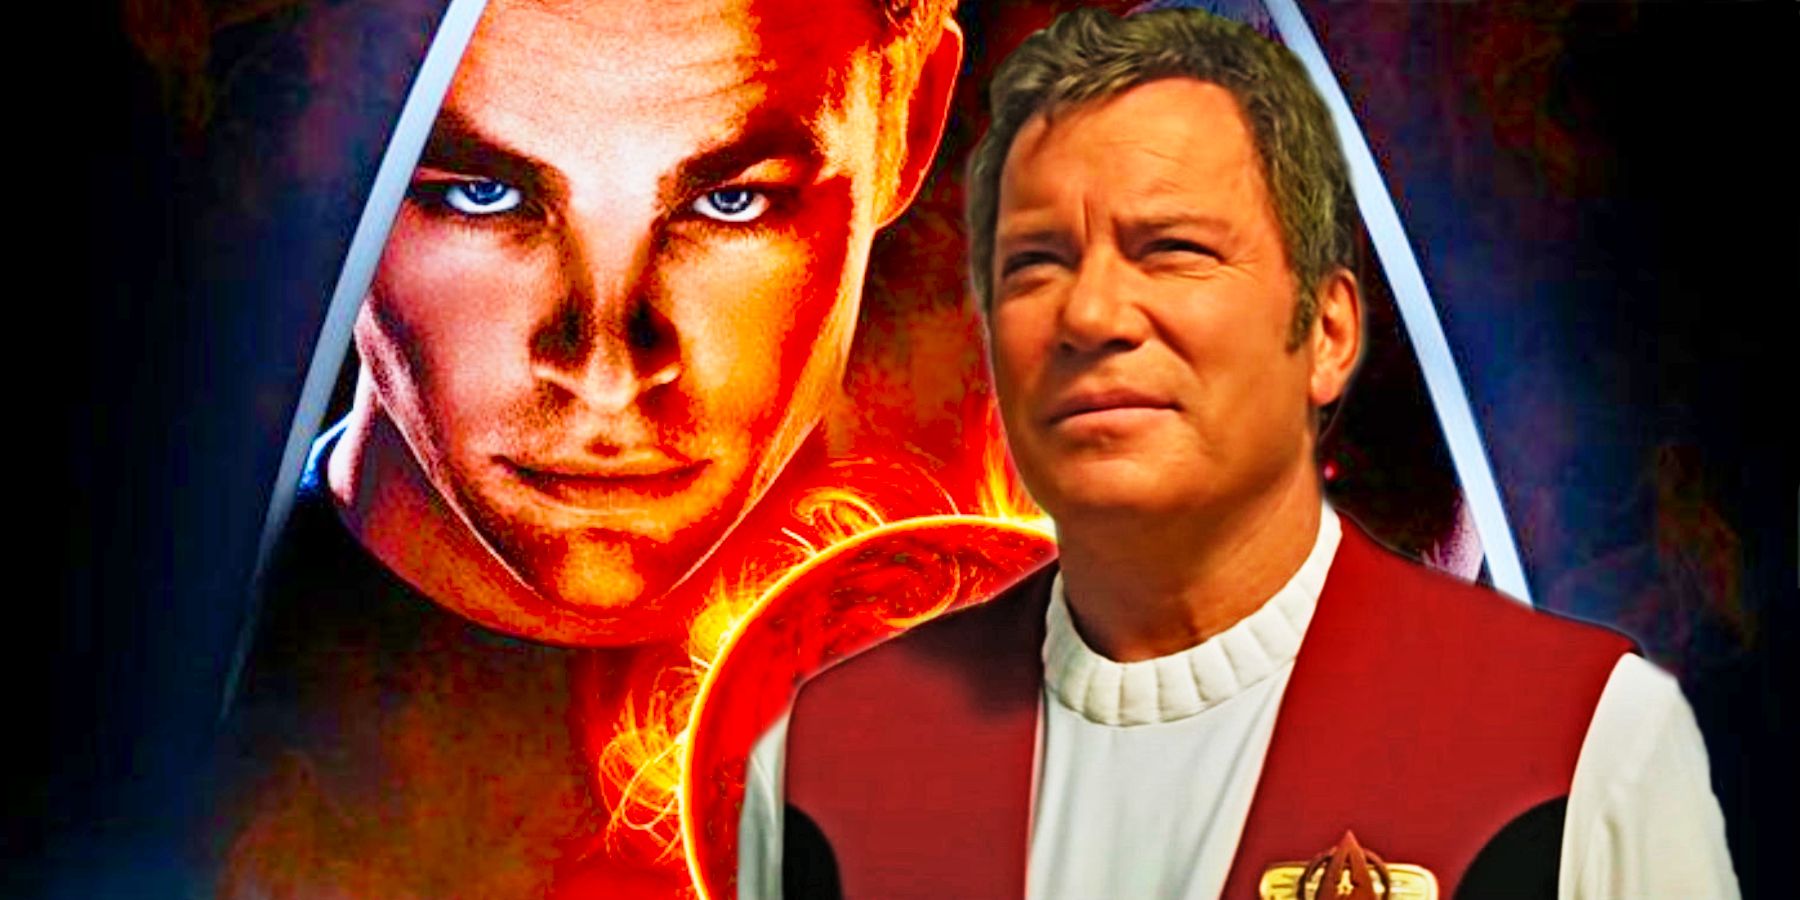 Chris Pine and William Shatner as young and old Kirk in Star Trek